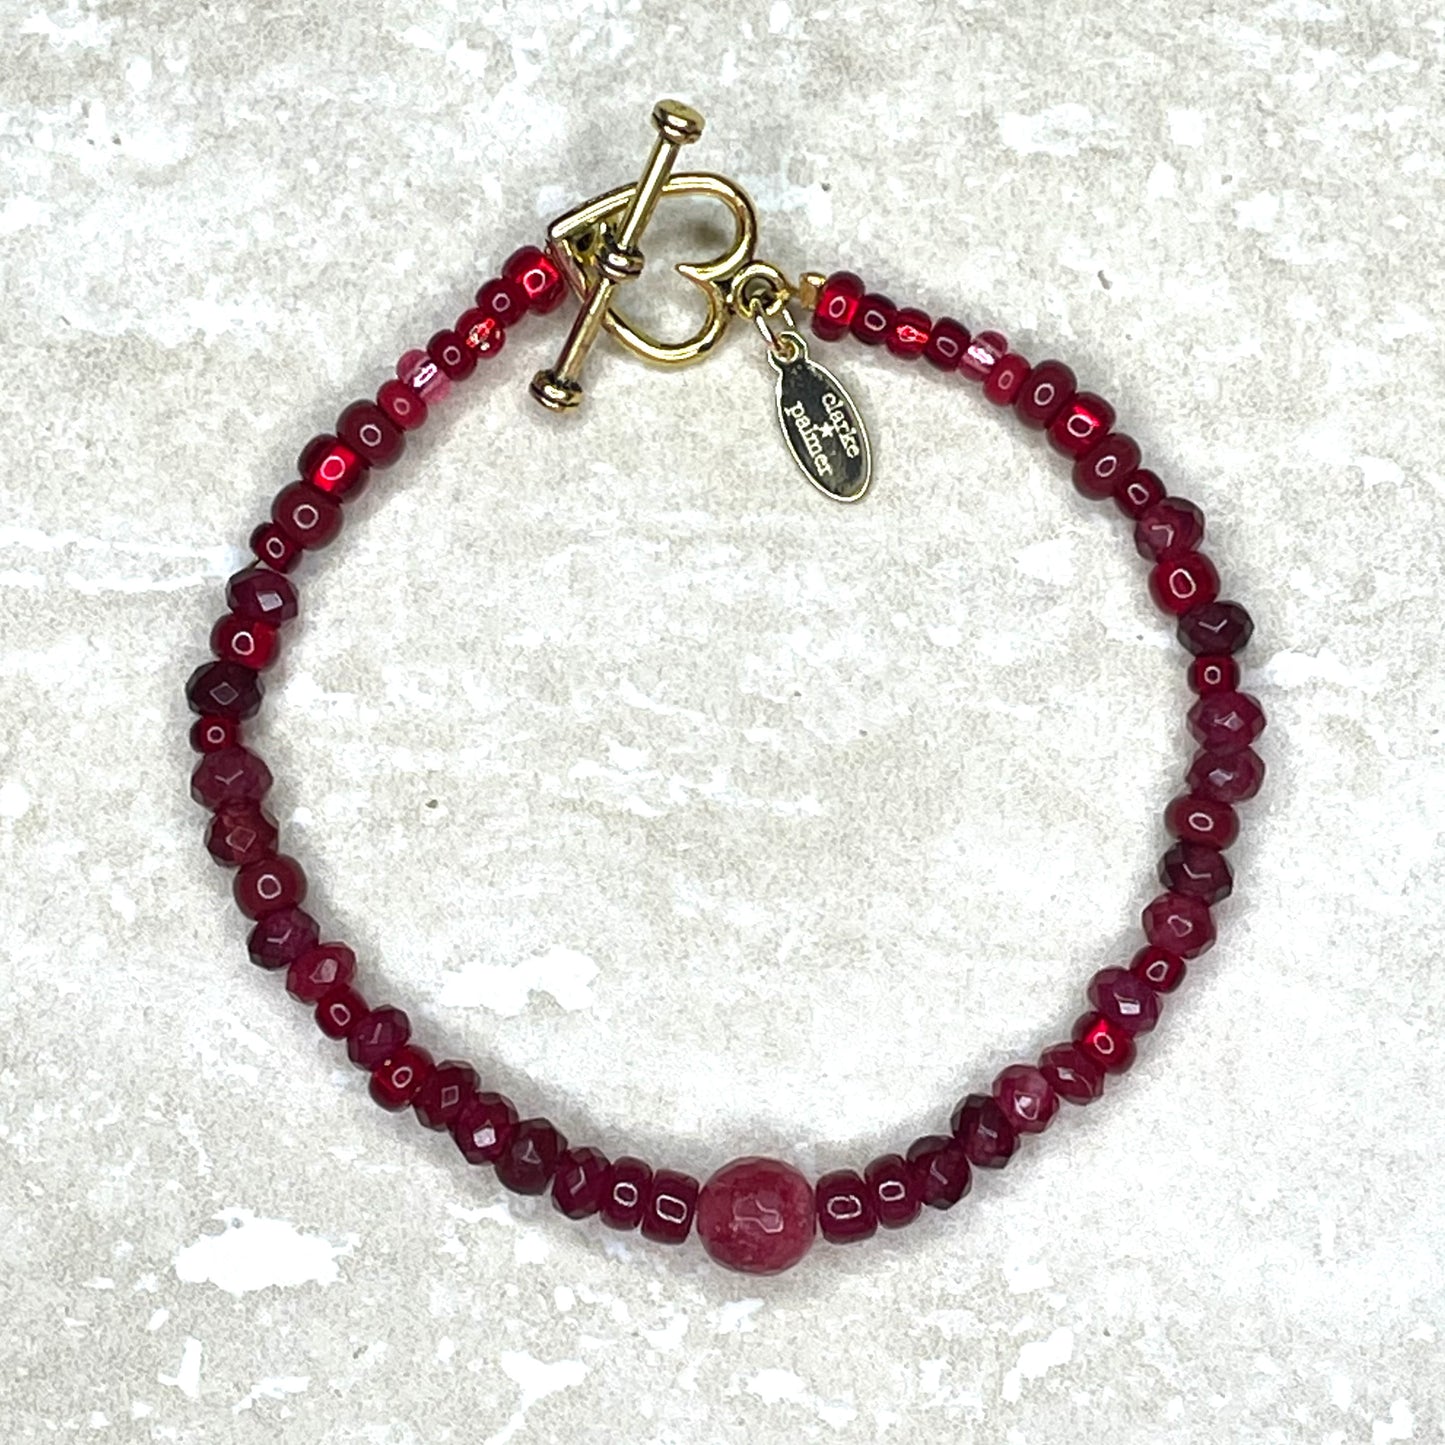 There's No Place Like Home Ruby Bracelet